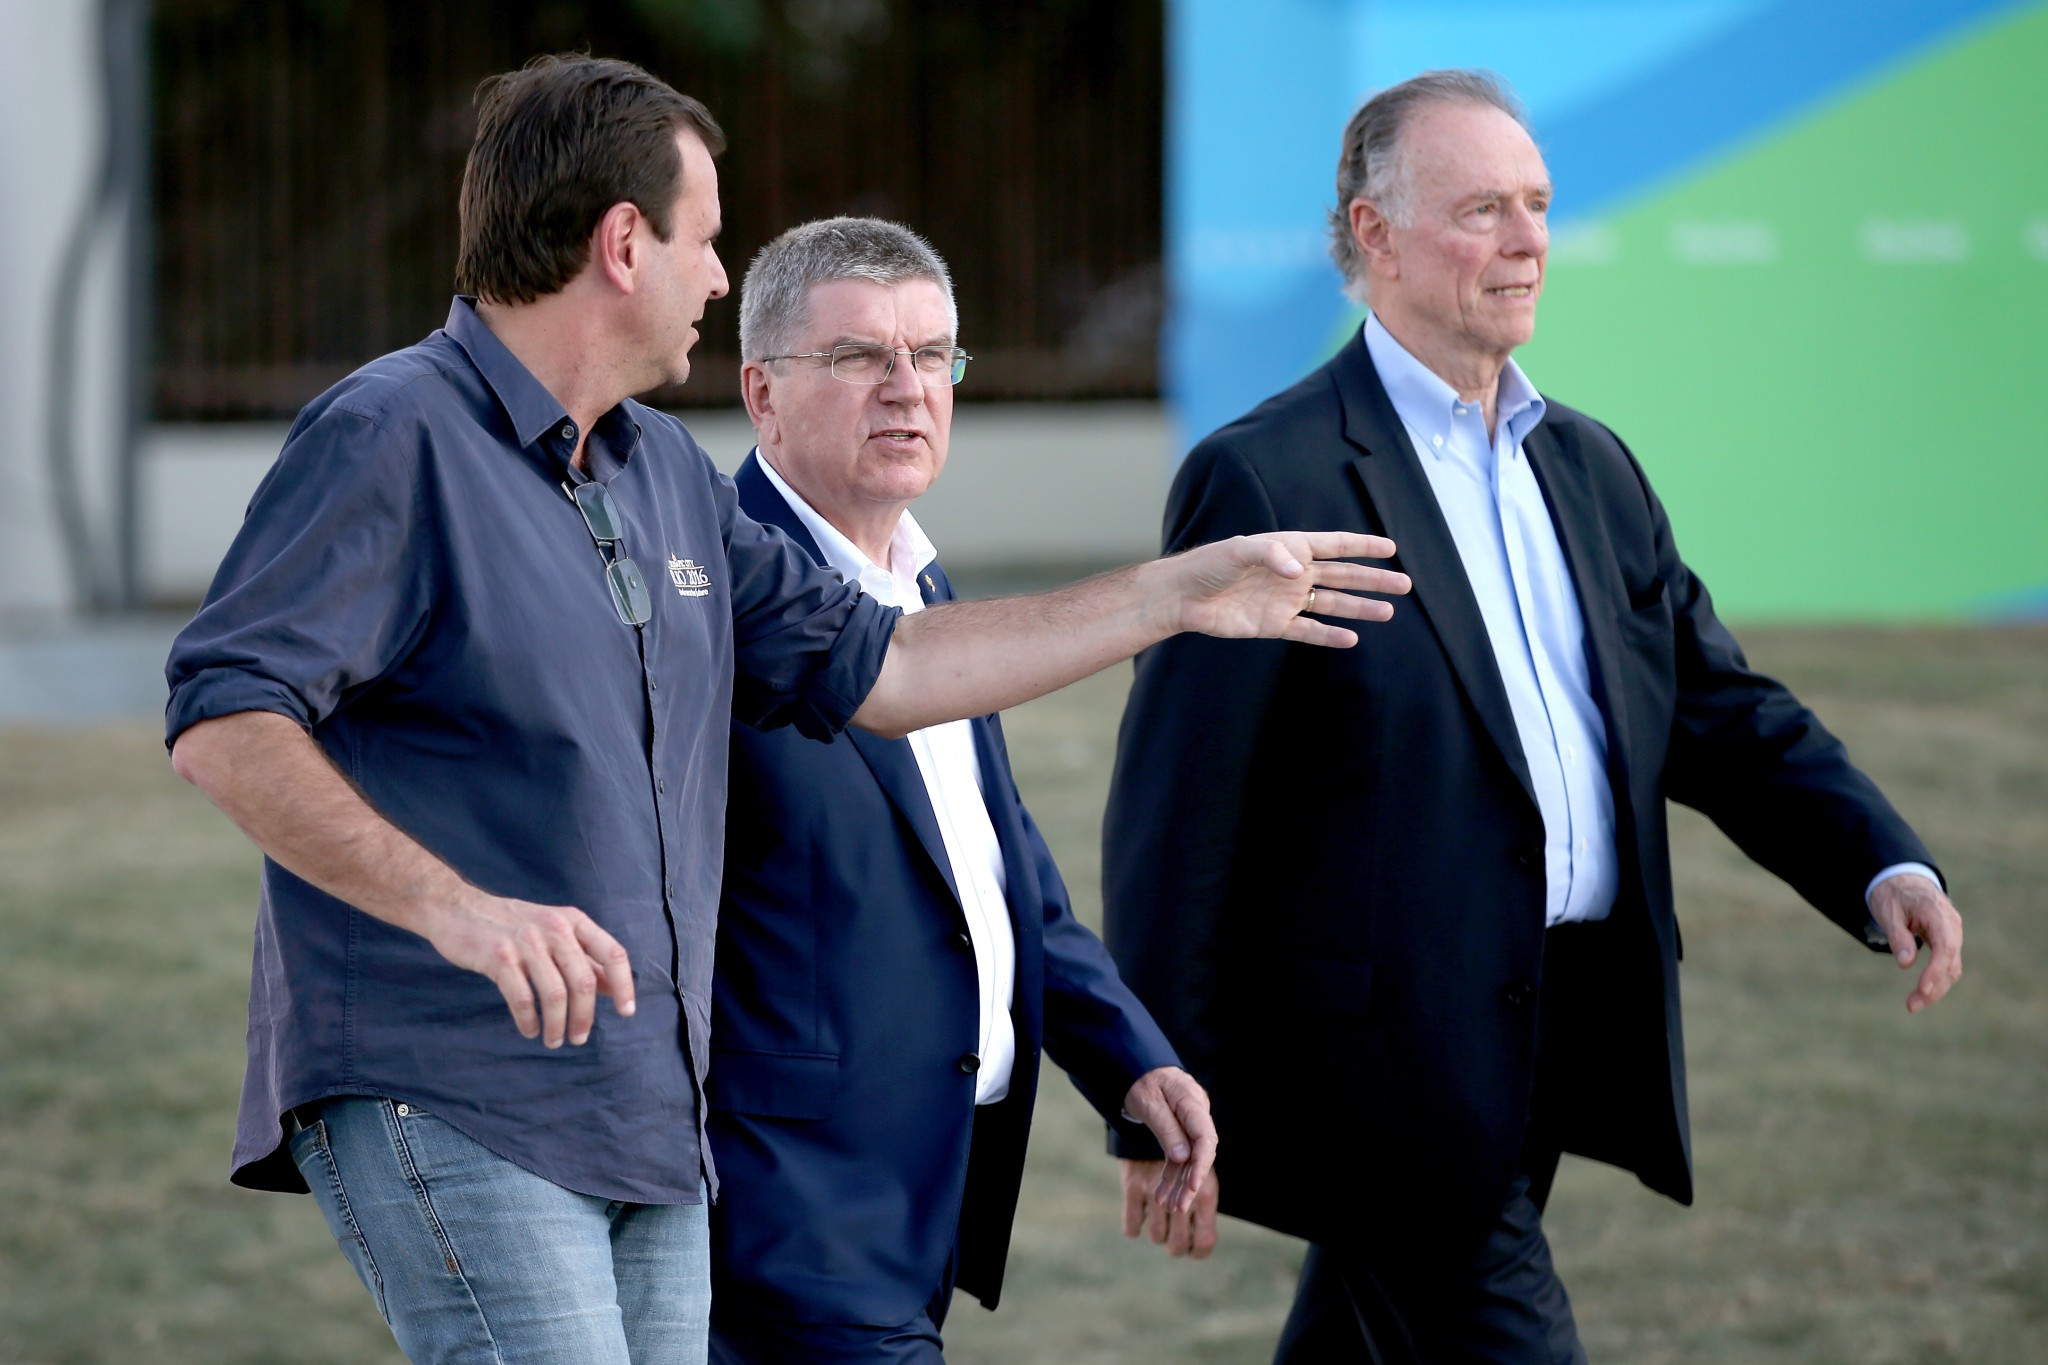 Former Rio de Janeiro Mayor Eduardo Paes, left, alongside IOC President Thomas Bach, centre, and Rio 2016 chief Carlos Nuzman, right, is among officials linked to corruption related to the Olympics ©Getty Images